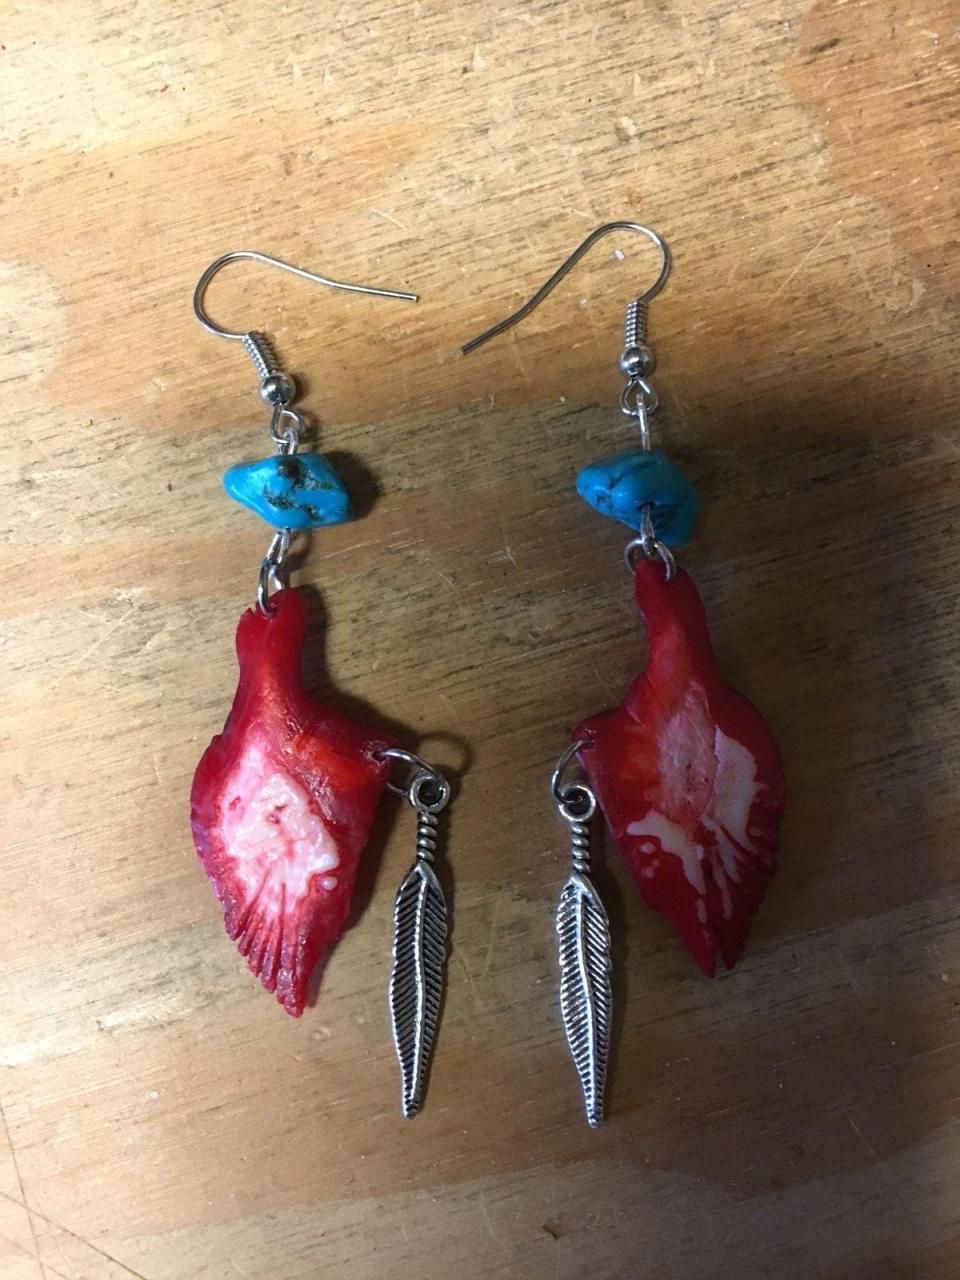 Earrings created by Douglas P. Fazzio using the ganoid scales of gar fish and dyed with Kool Aid.